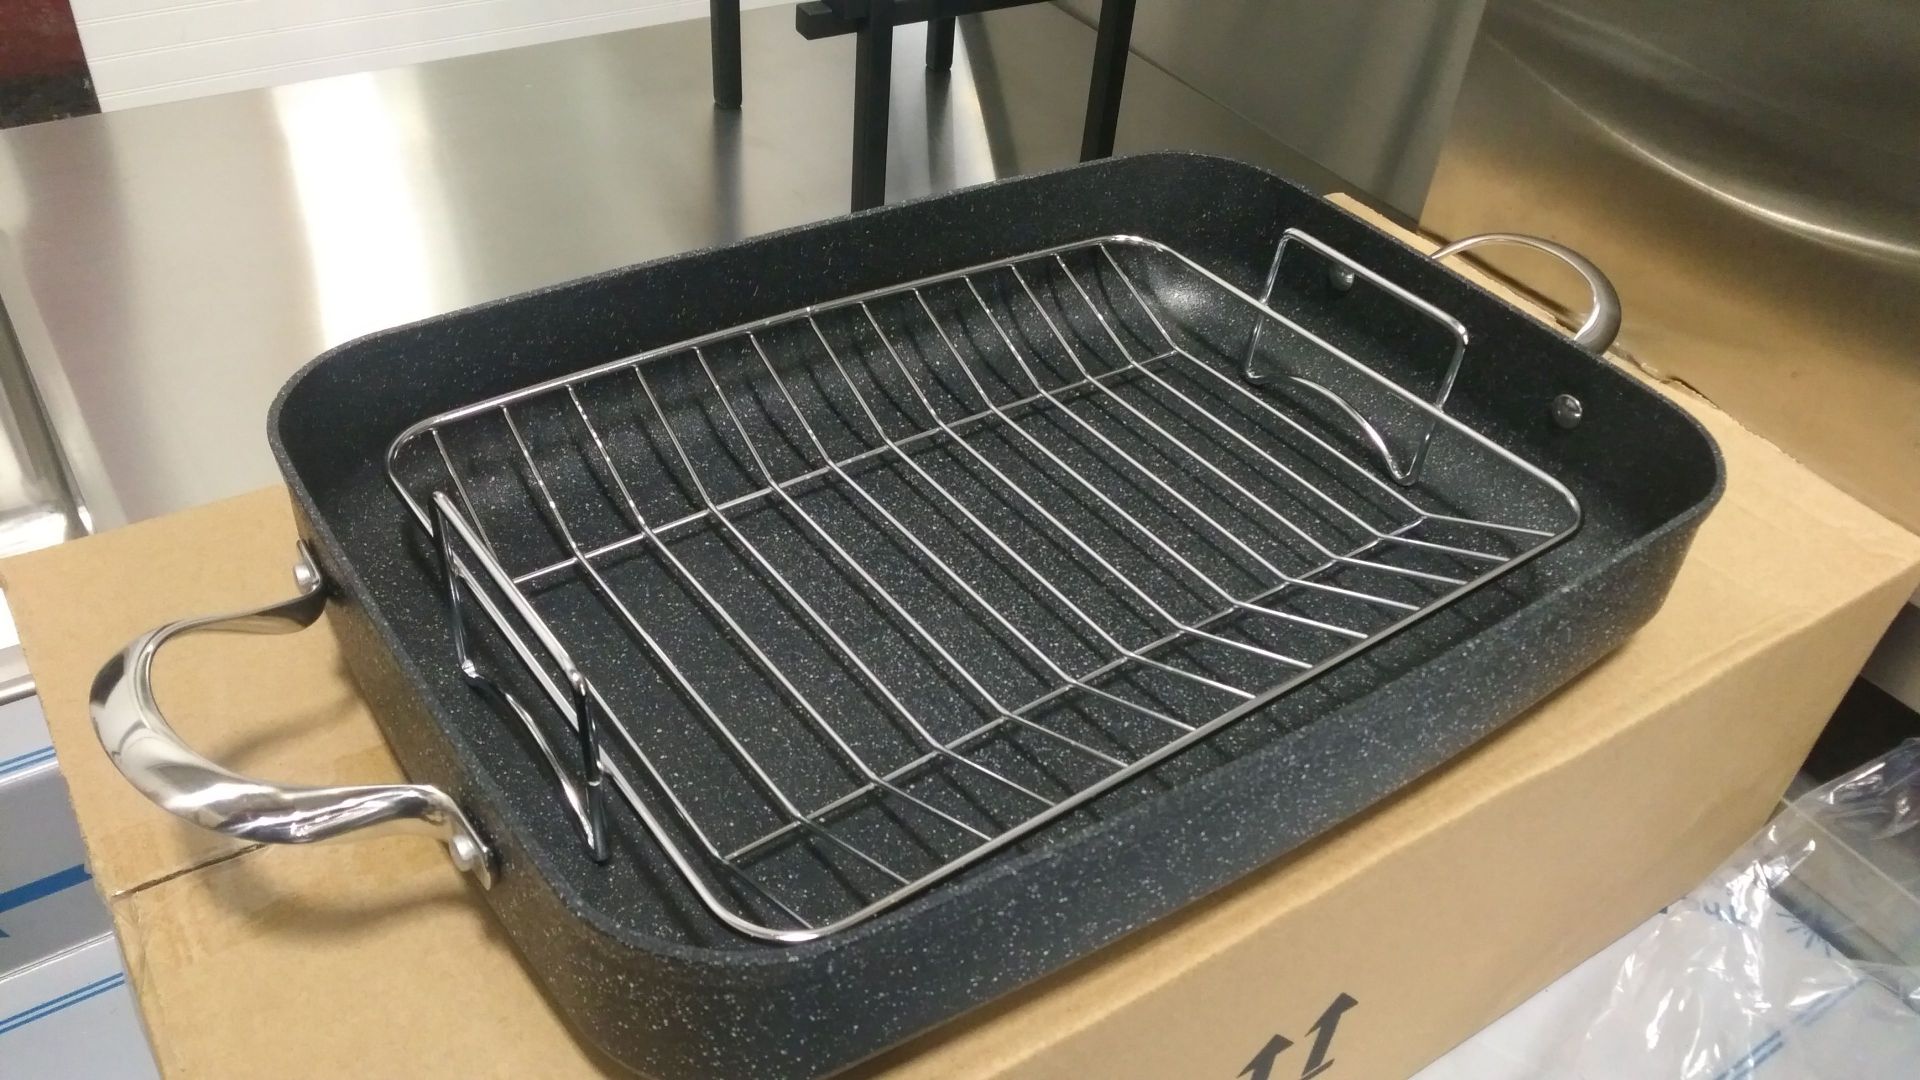 Heritage "The Rock" Roasting Pan with Rack